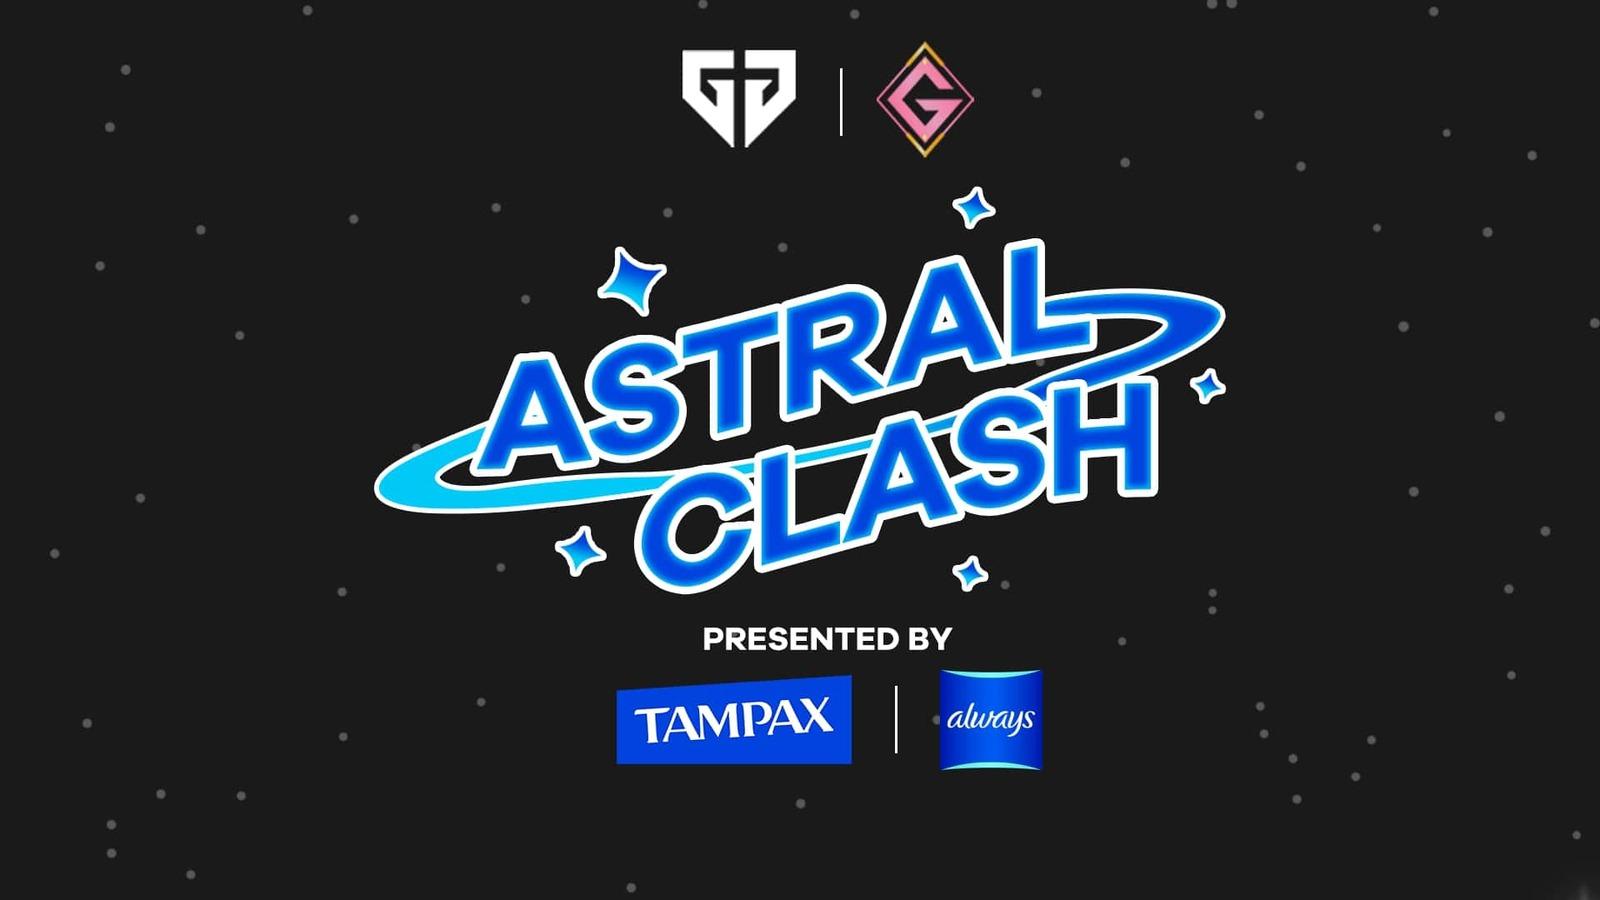 Astral Clash logo with Gen.G, Galorants and other logos featured